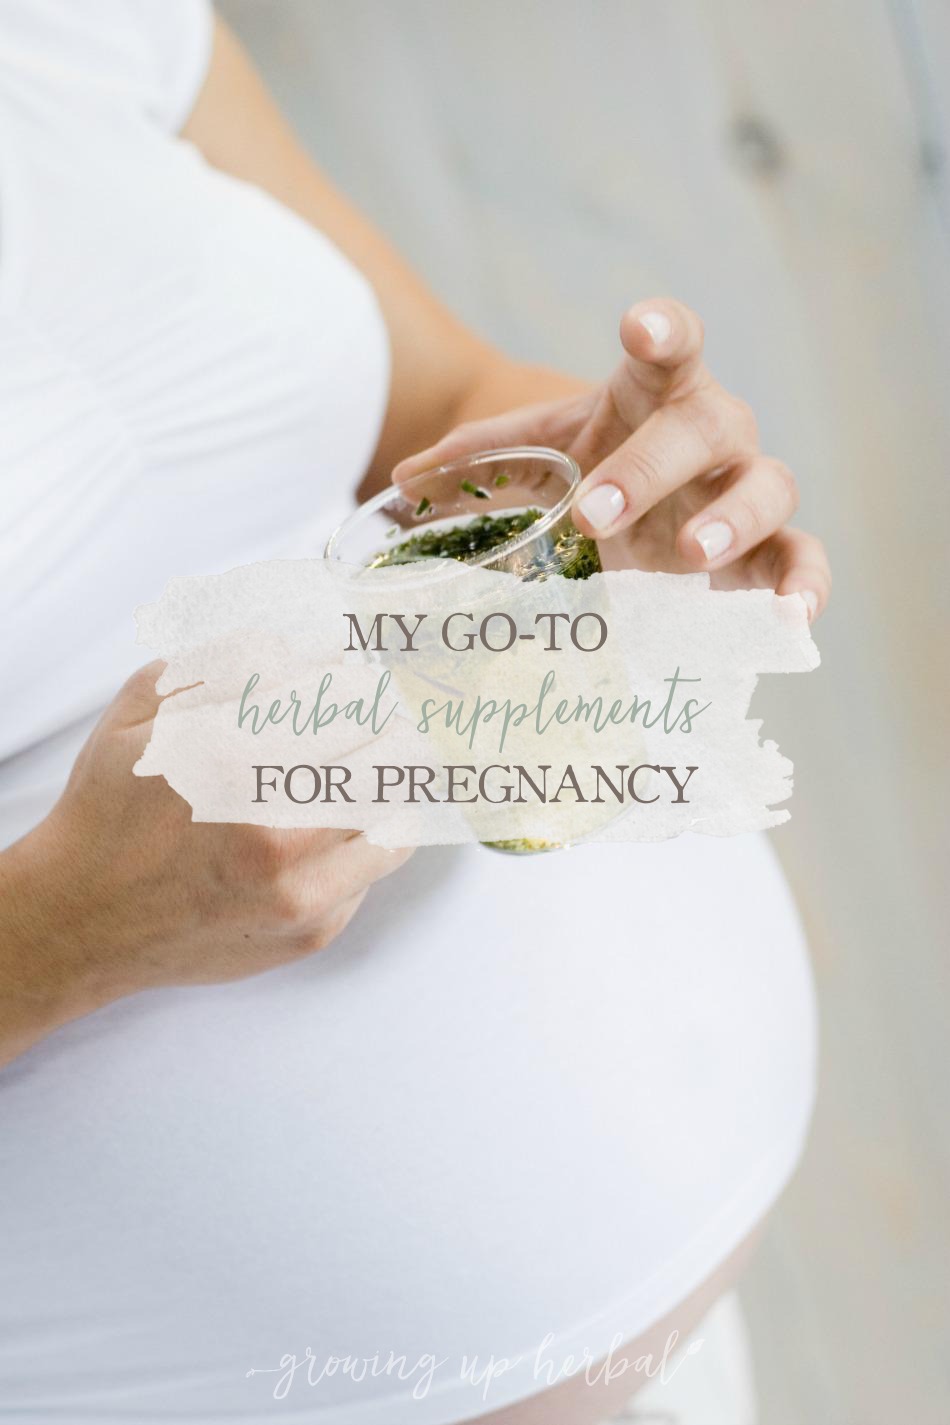 My Go-To Herbal Supplements For Pregnancy | Growing Up Herbal | Today I'm sharing my favorite herbal supplements for pregnancy!